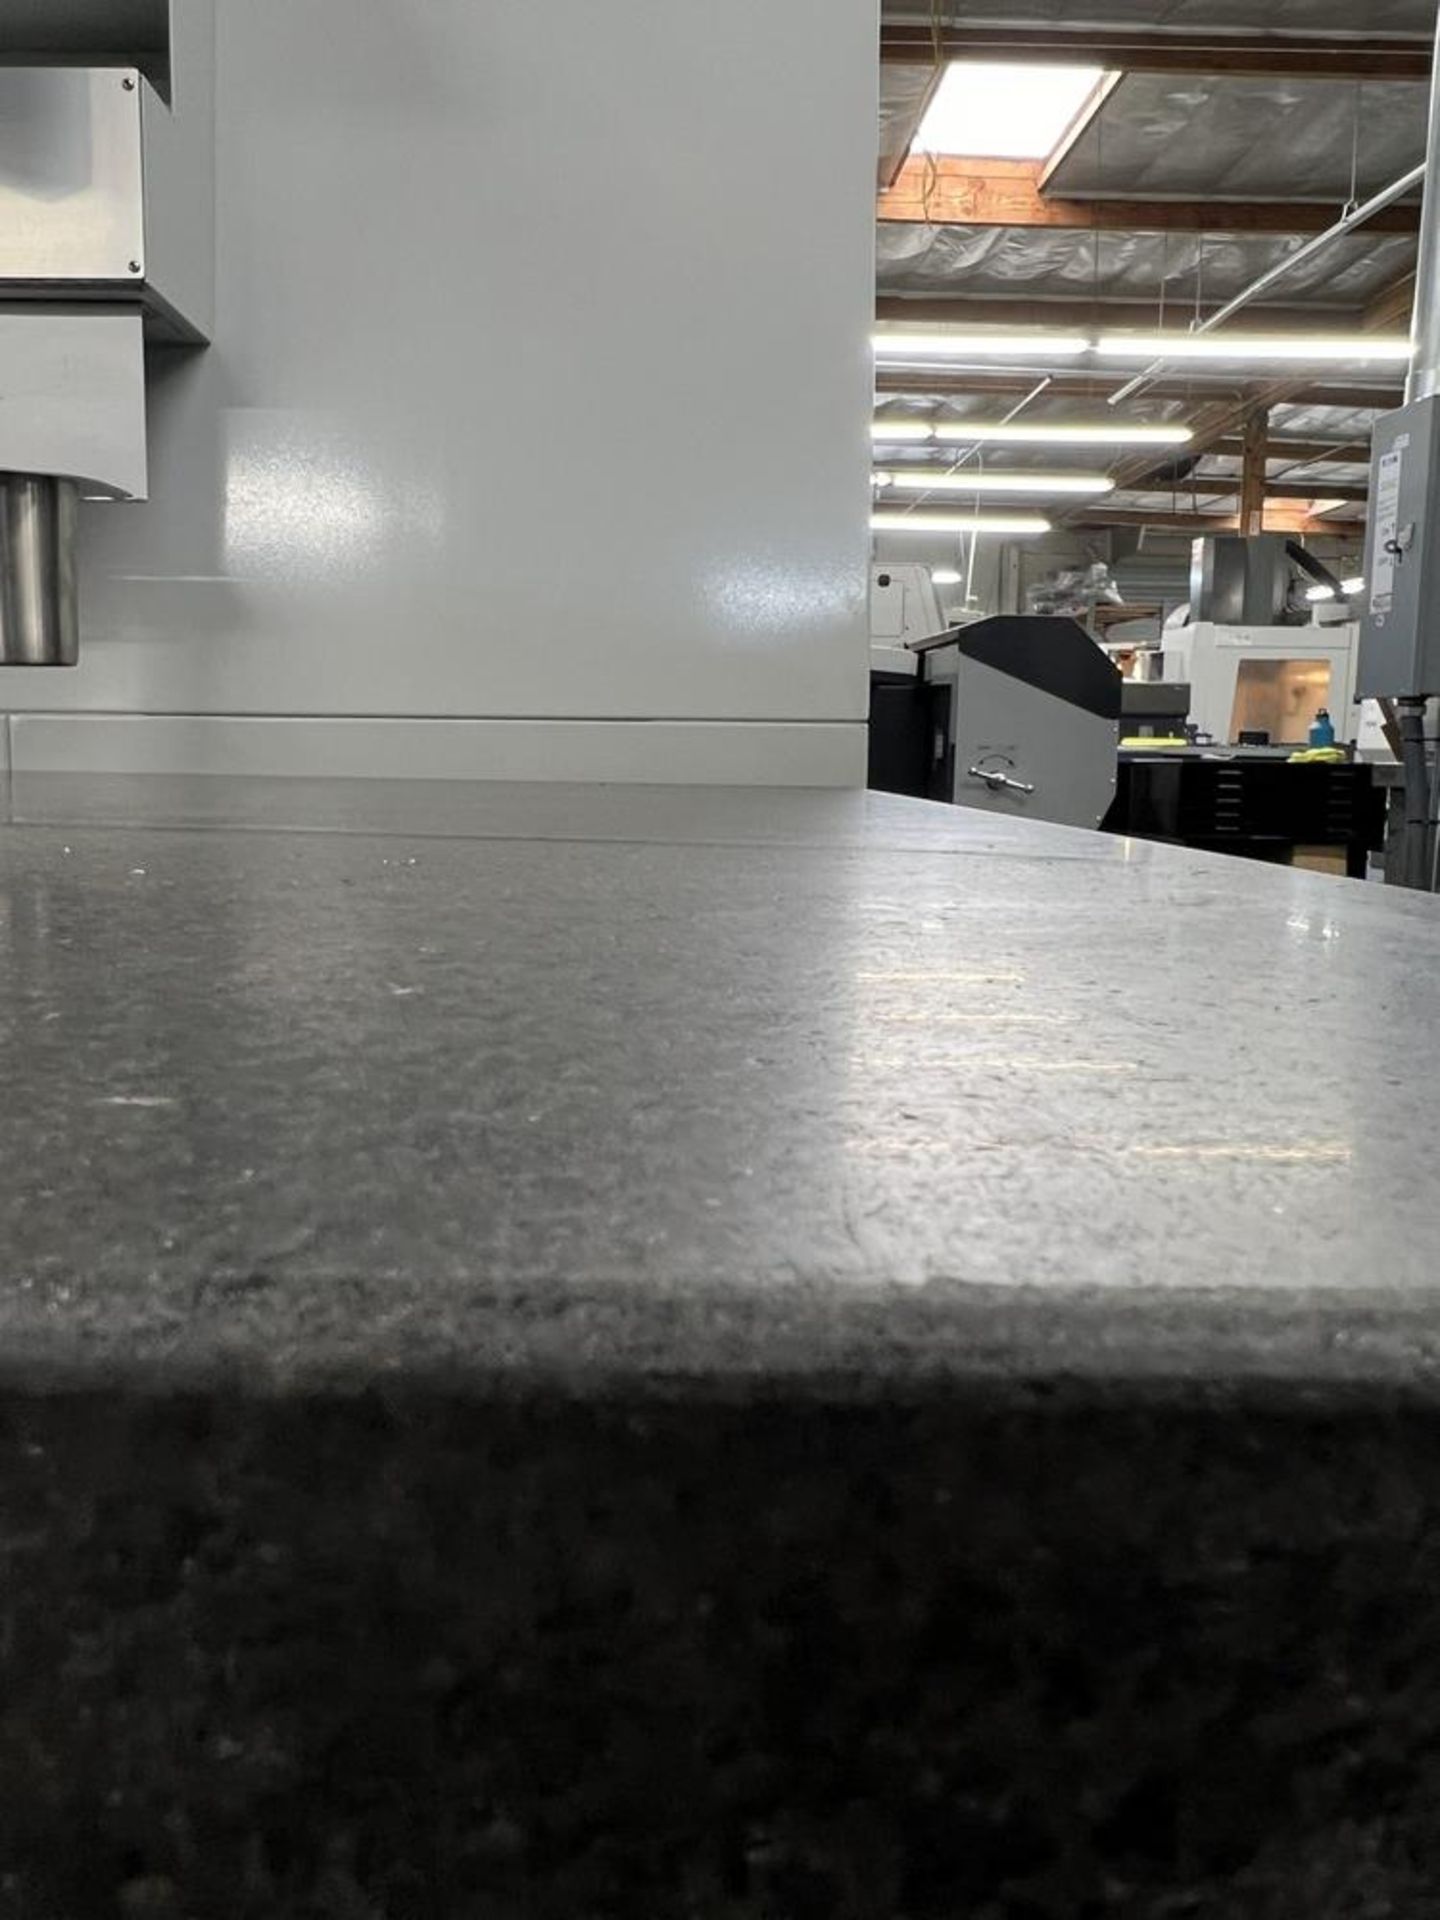 Black Granite Surface Plate 3' x 4' x 6" One Heavy Duty Stand - Image 4 of 5